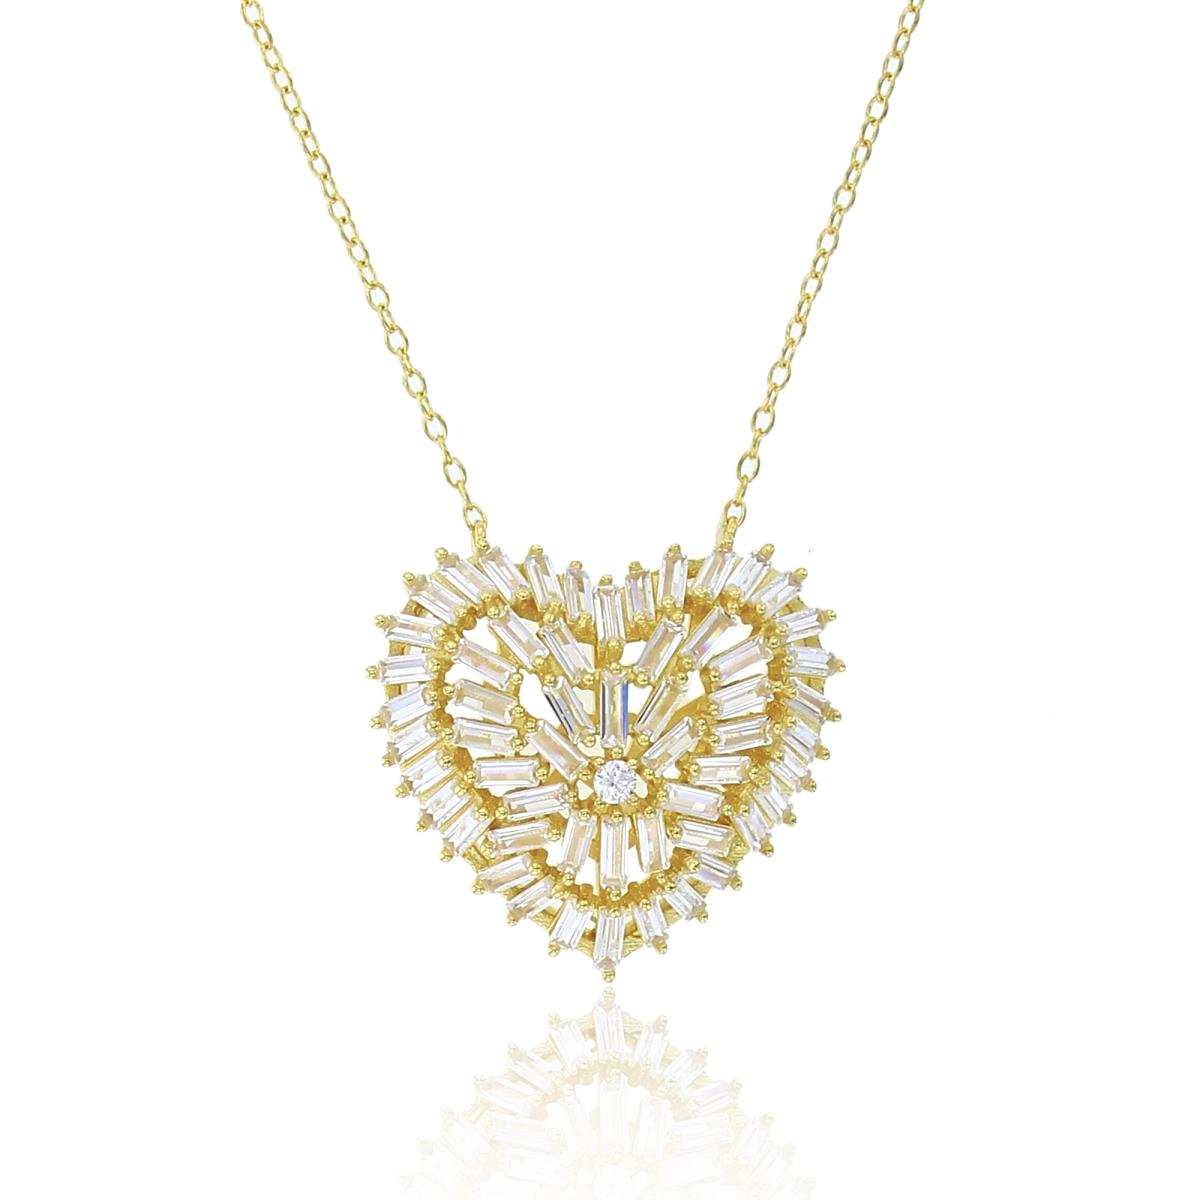 Sterling Silver+1Micron Yellow Gold SB & Rnd White CZ Puffy Scattered Heart 18"Necklace